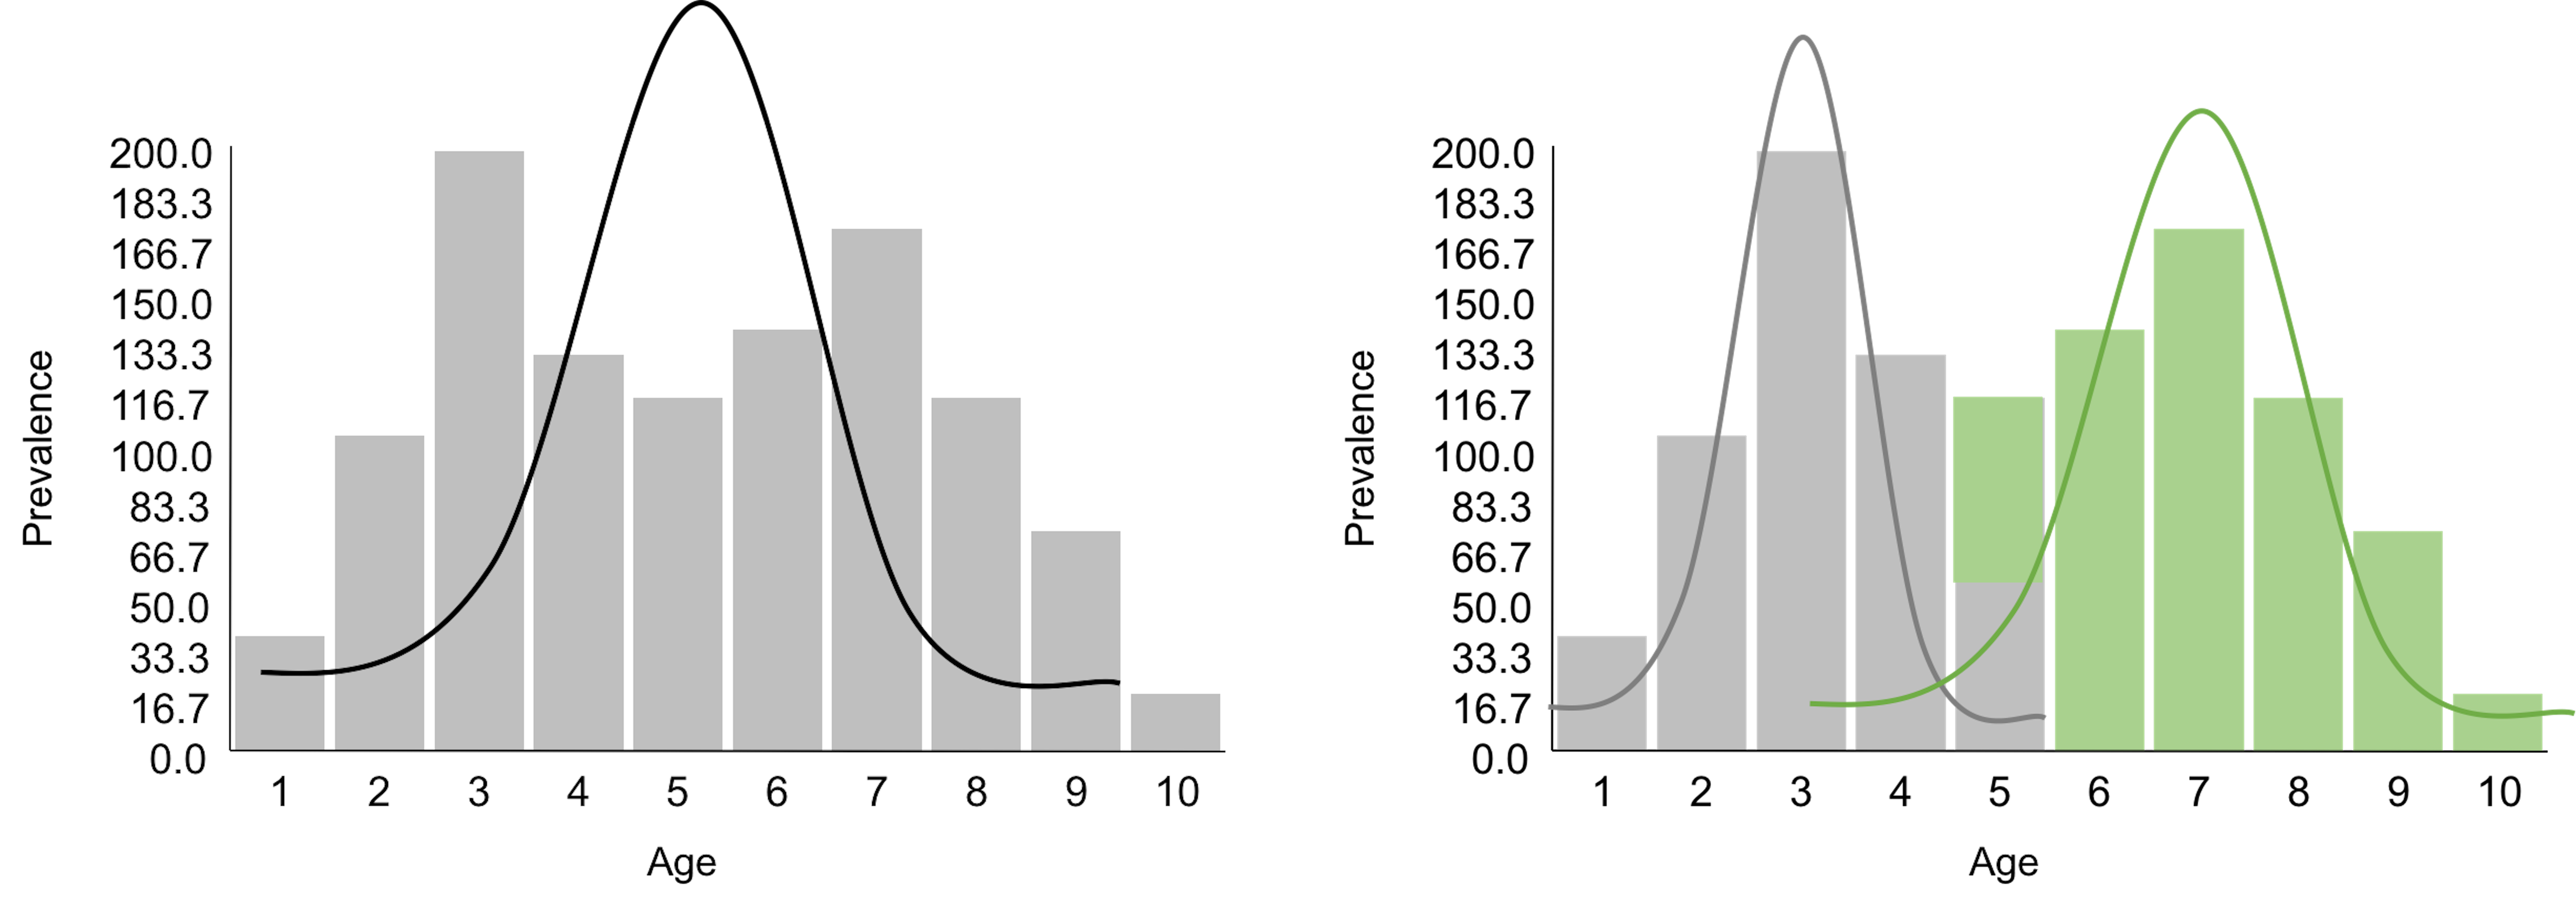 A tailor tries to (left) make an outfit (i.e., the normal curve) for a client (i.e., the data, represented as a histogram) vs. (right) then the tailor realizes the form of the outfit should be two normal curves